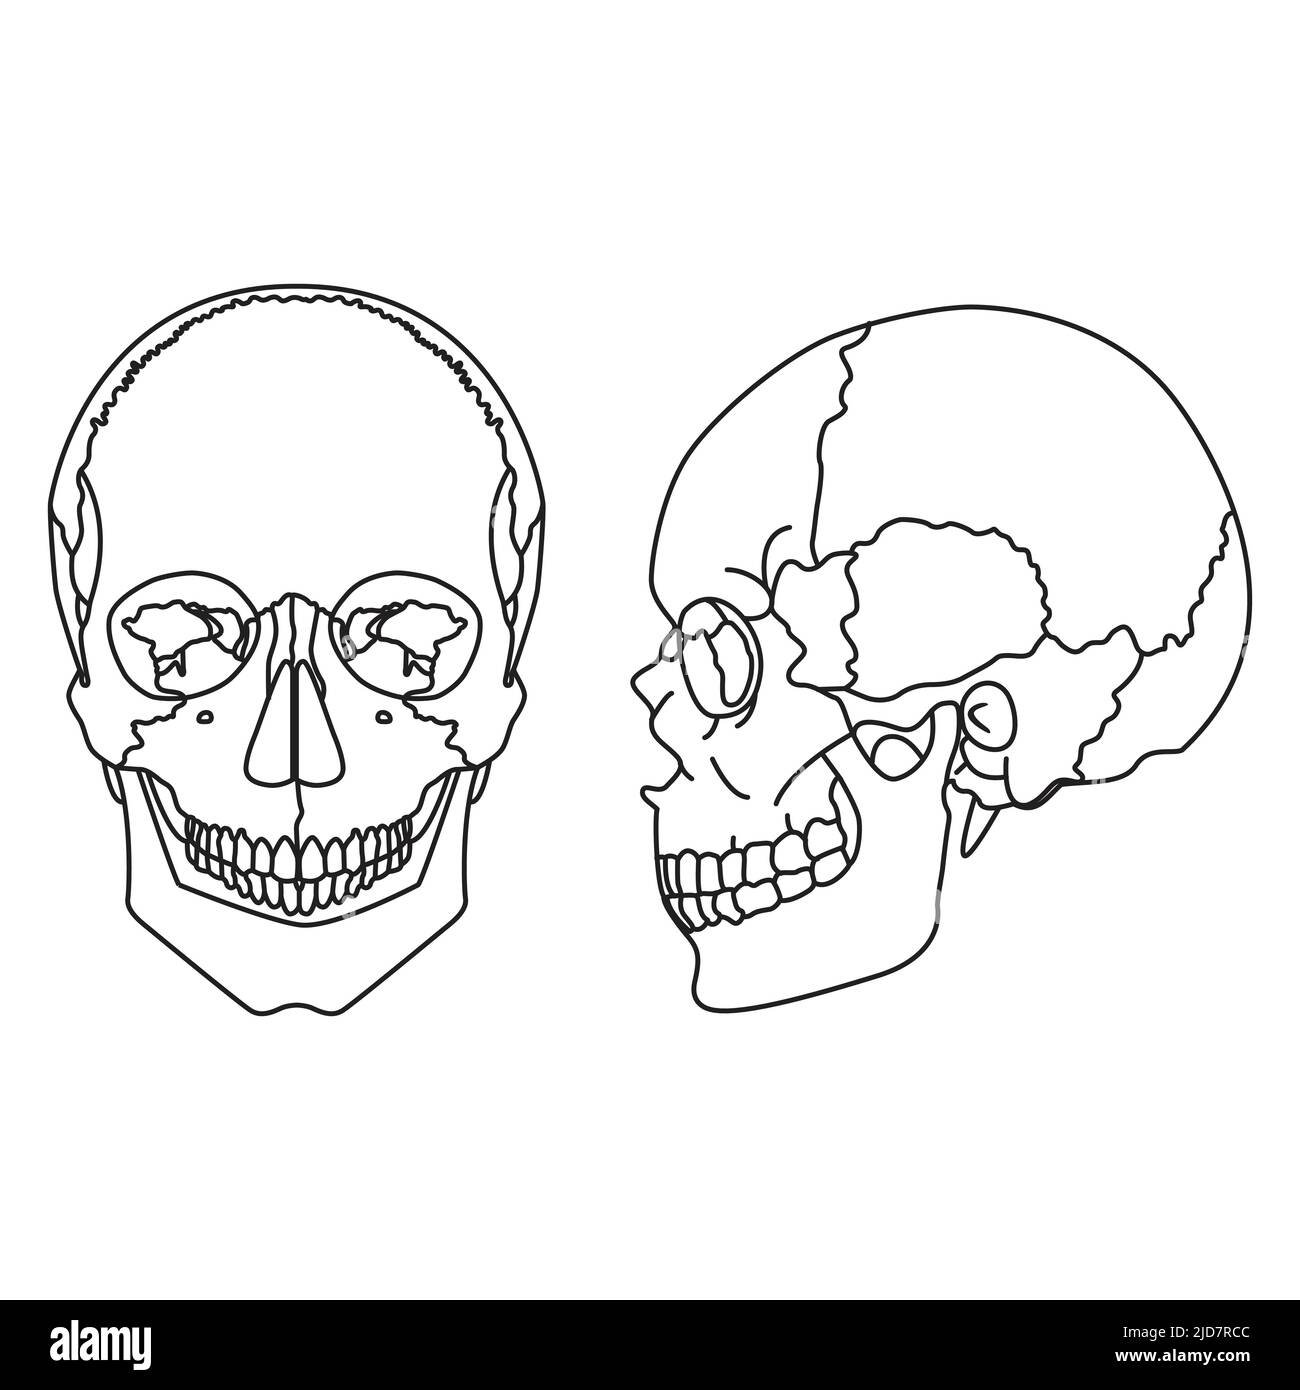 human skull with a lower jaw. front and side view Stock Vector